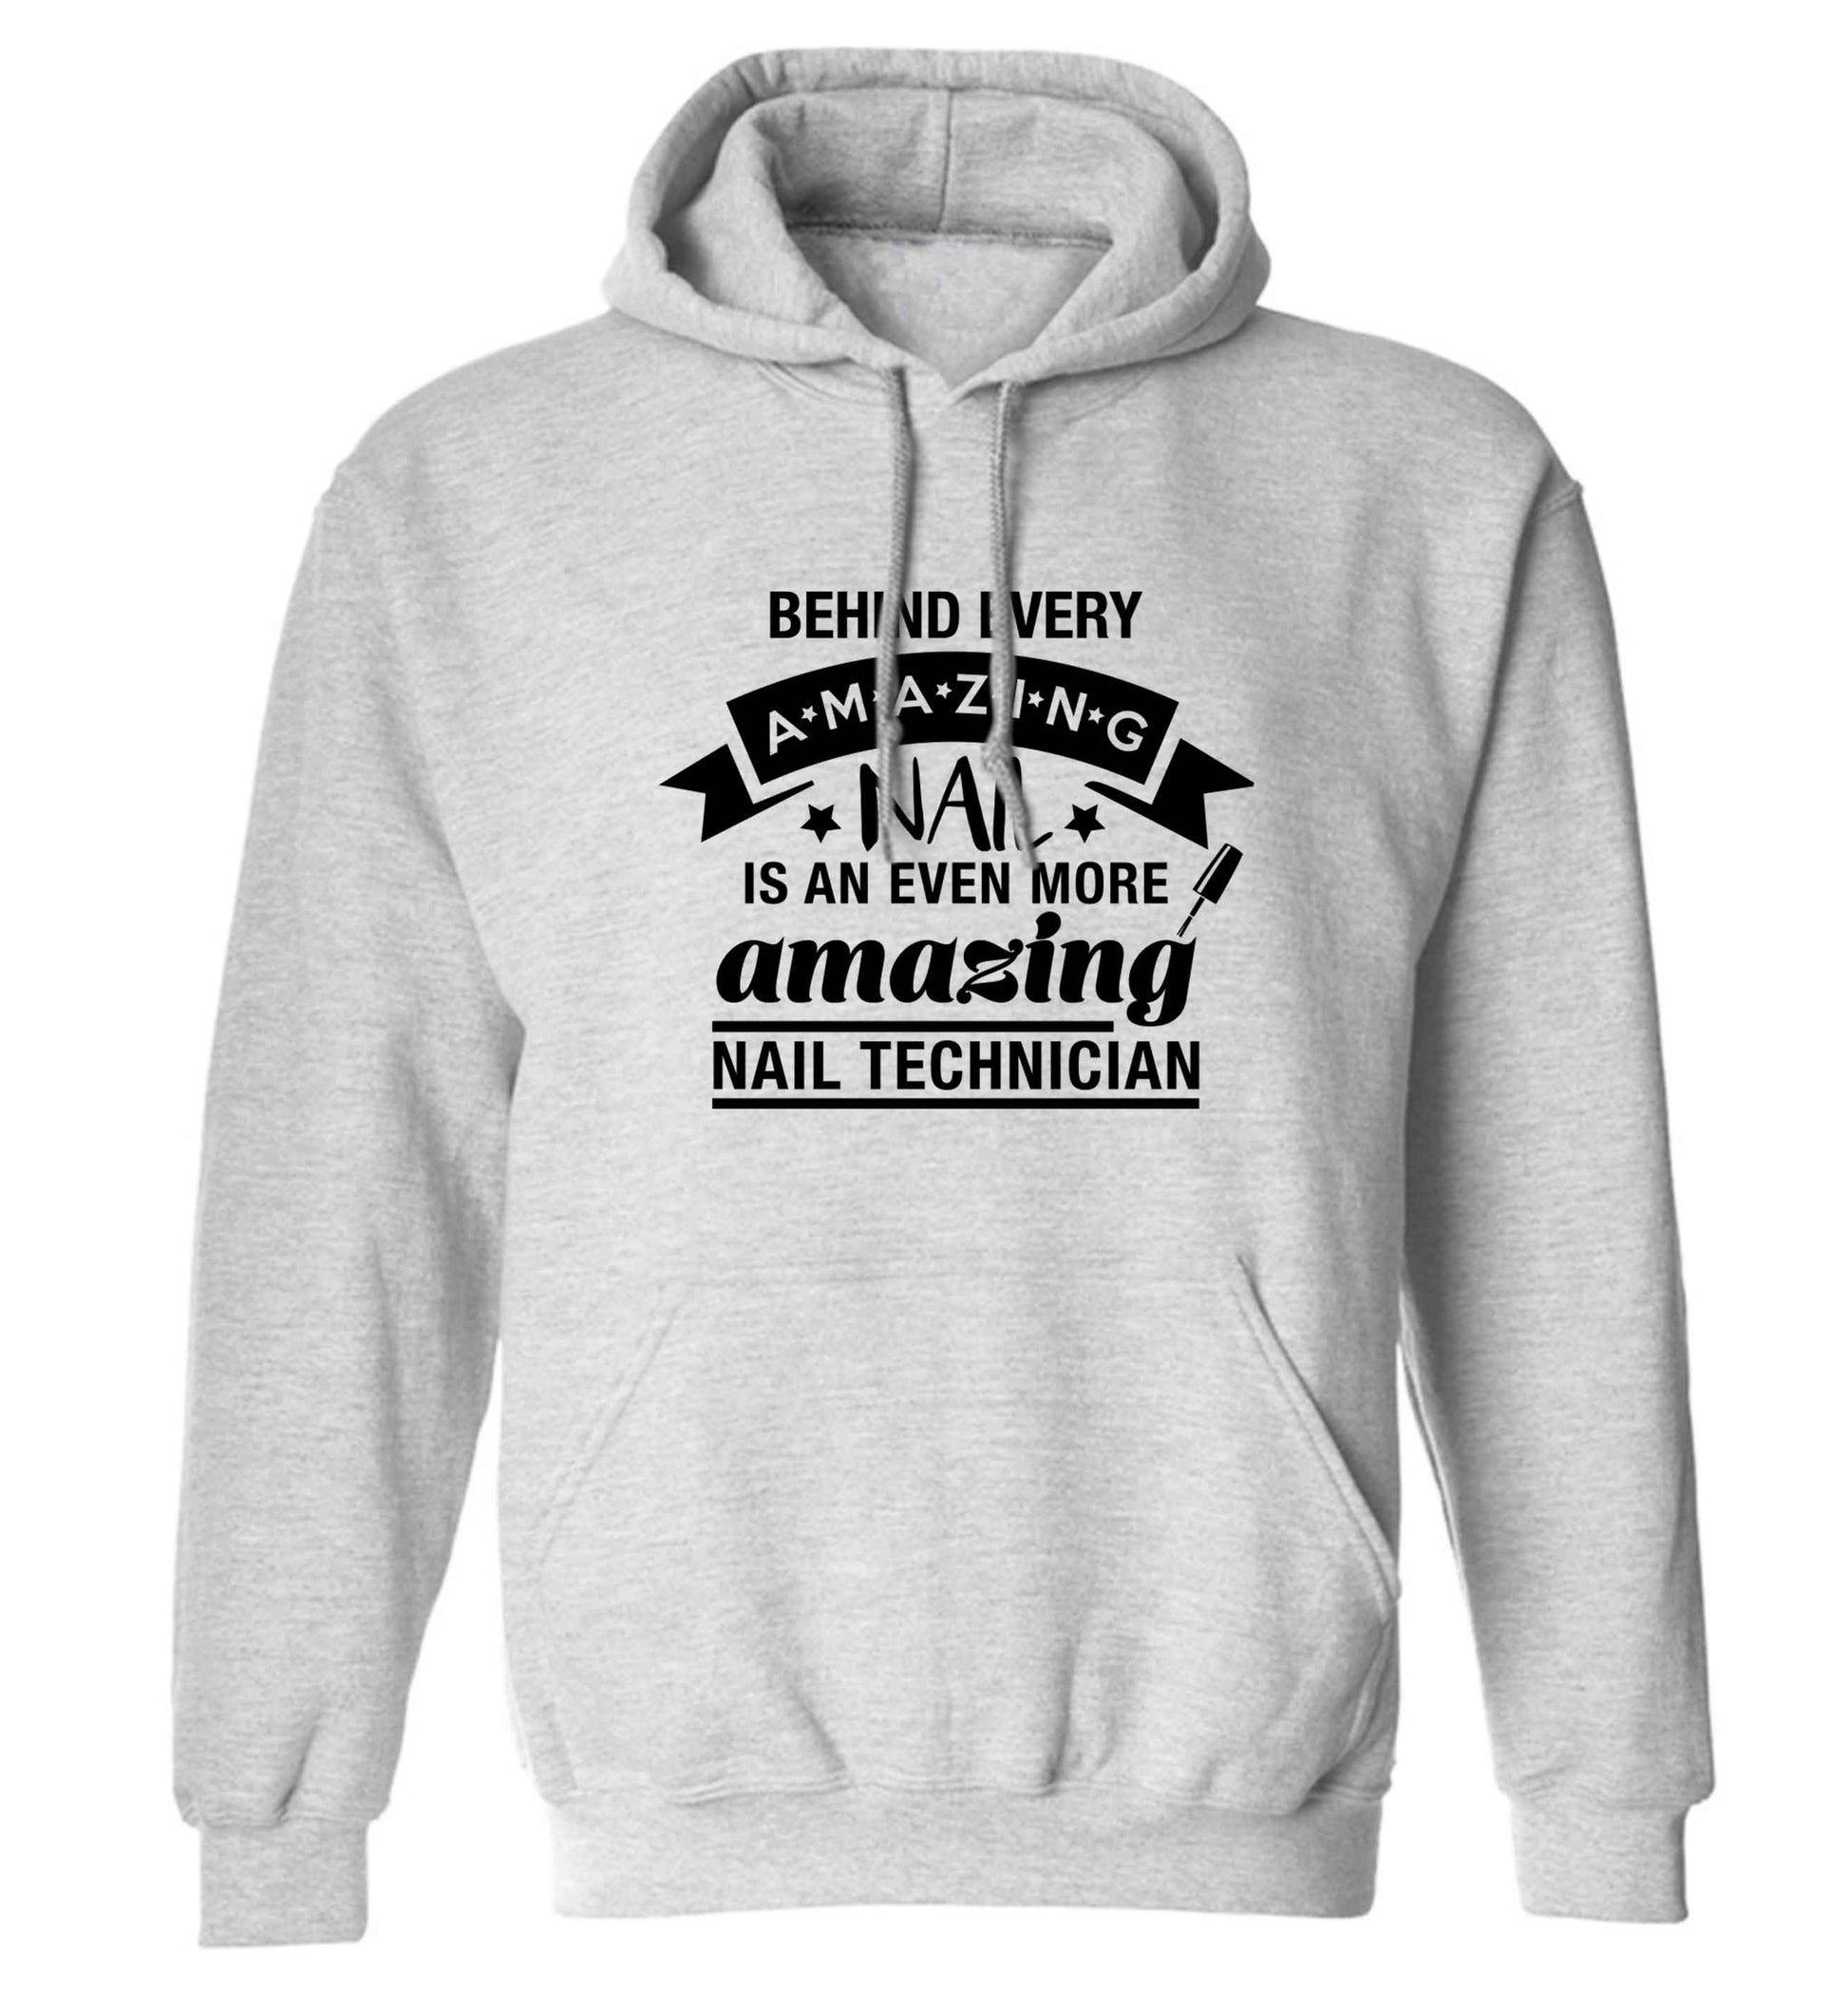 Behind every amazing nail is an even more amazing nail technician adults unisex grey hoodie 2XL